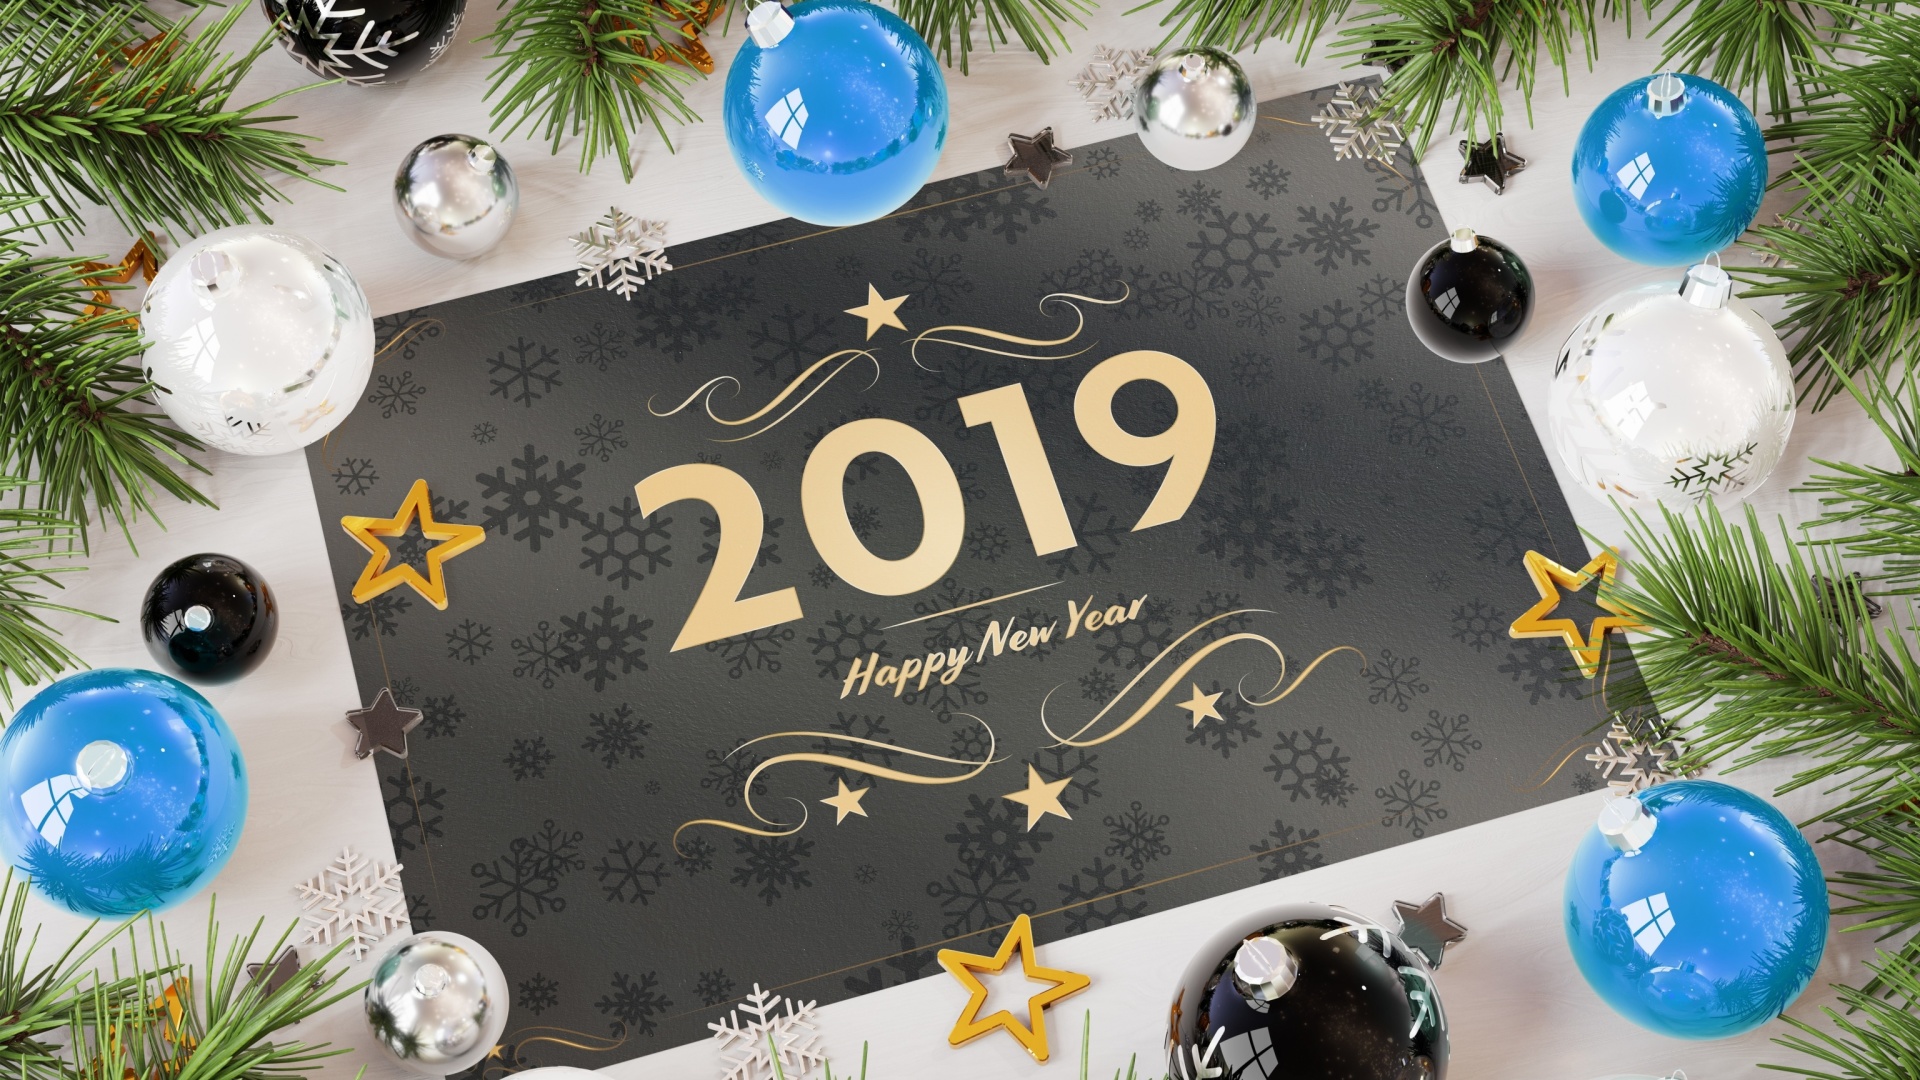 2019 Happy New Year Message wallpaper 1920x1080